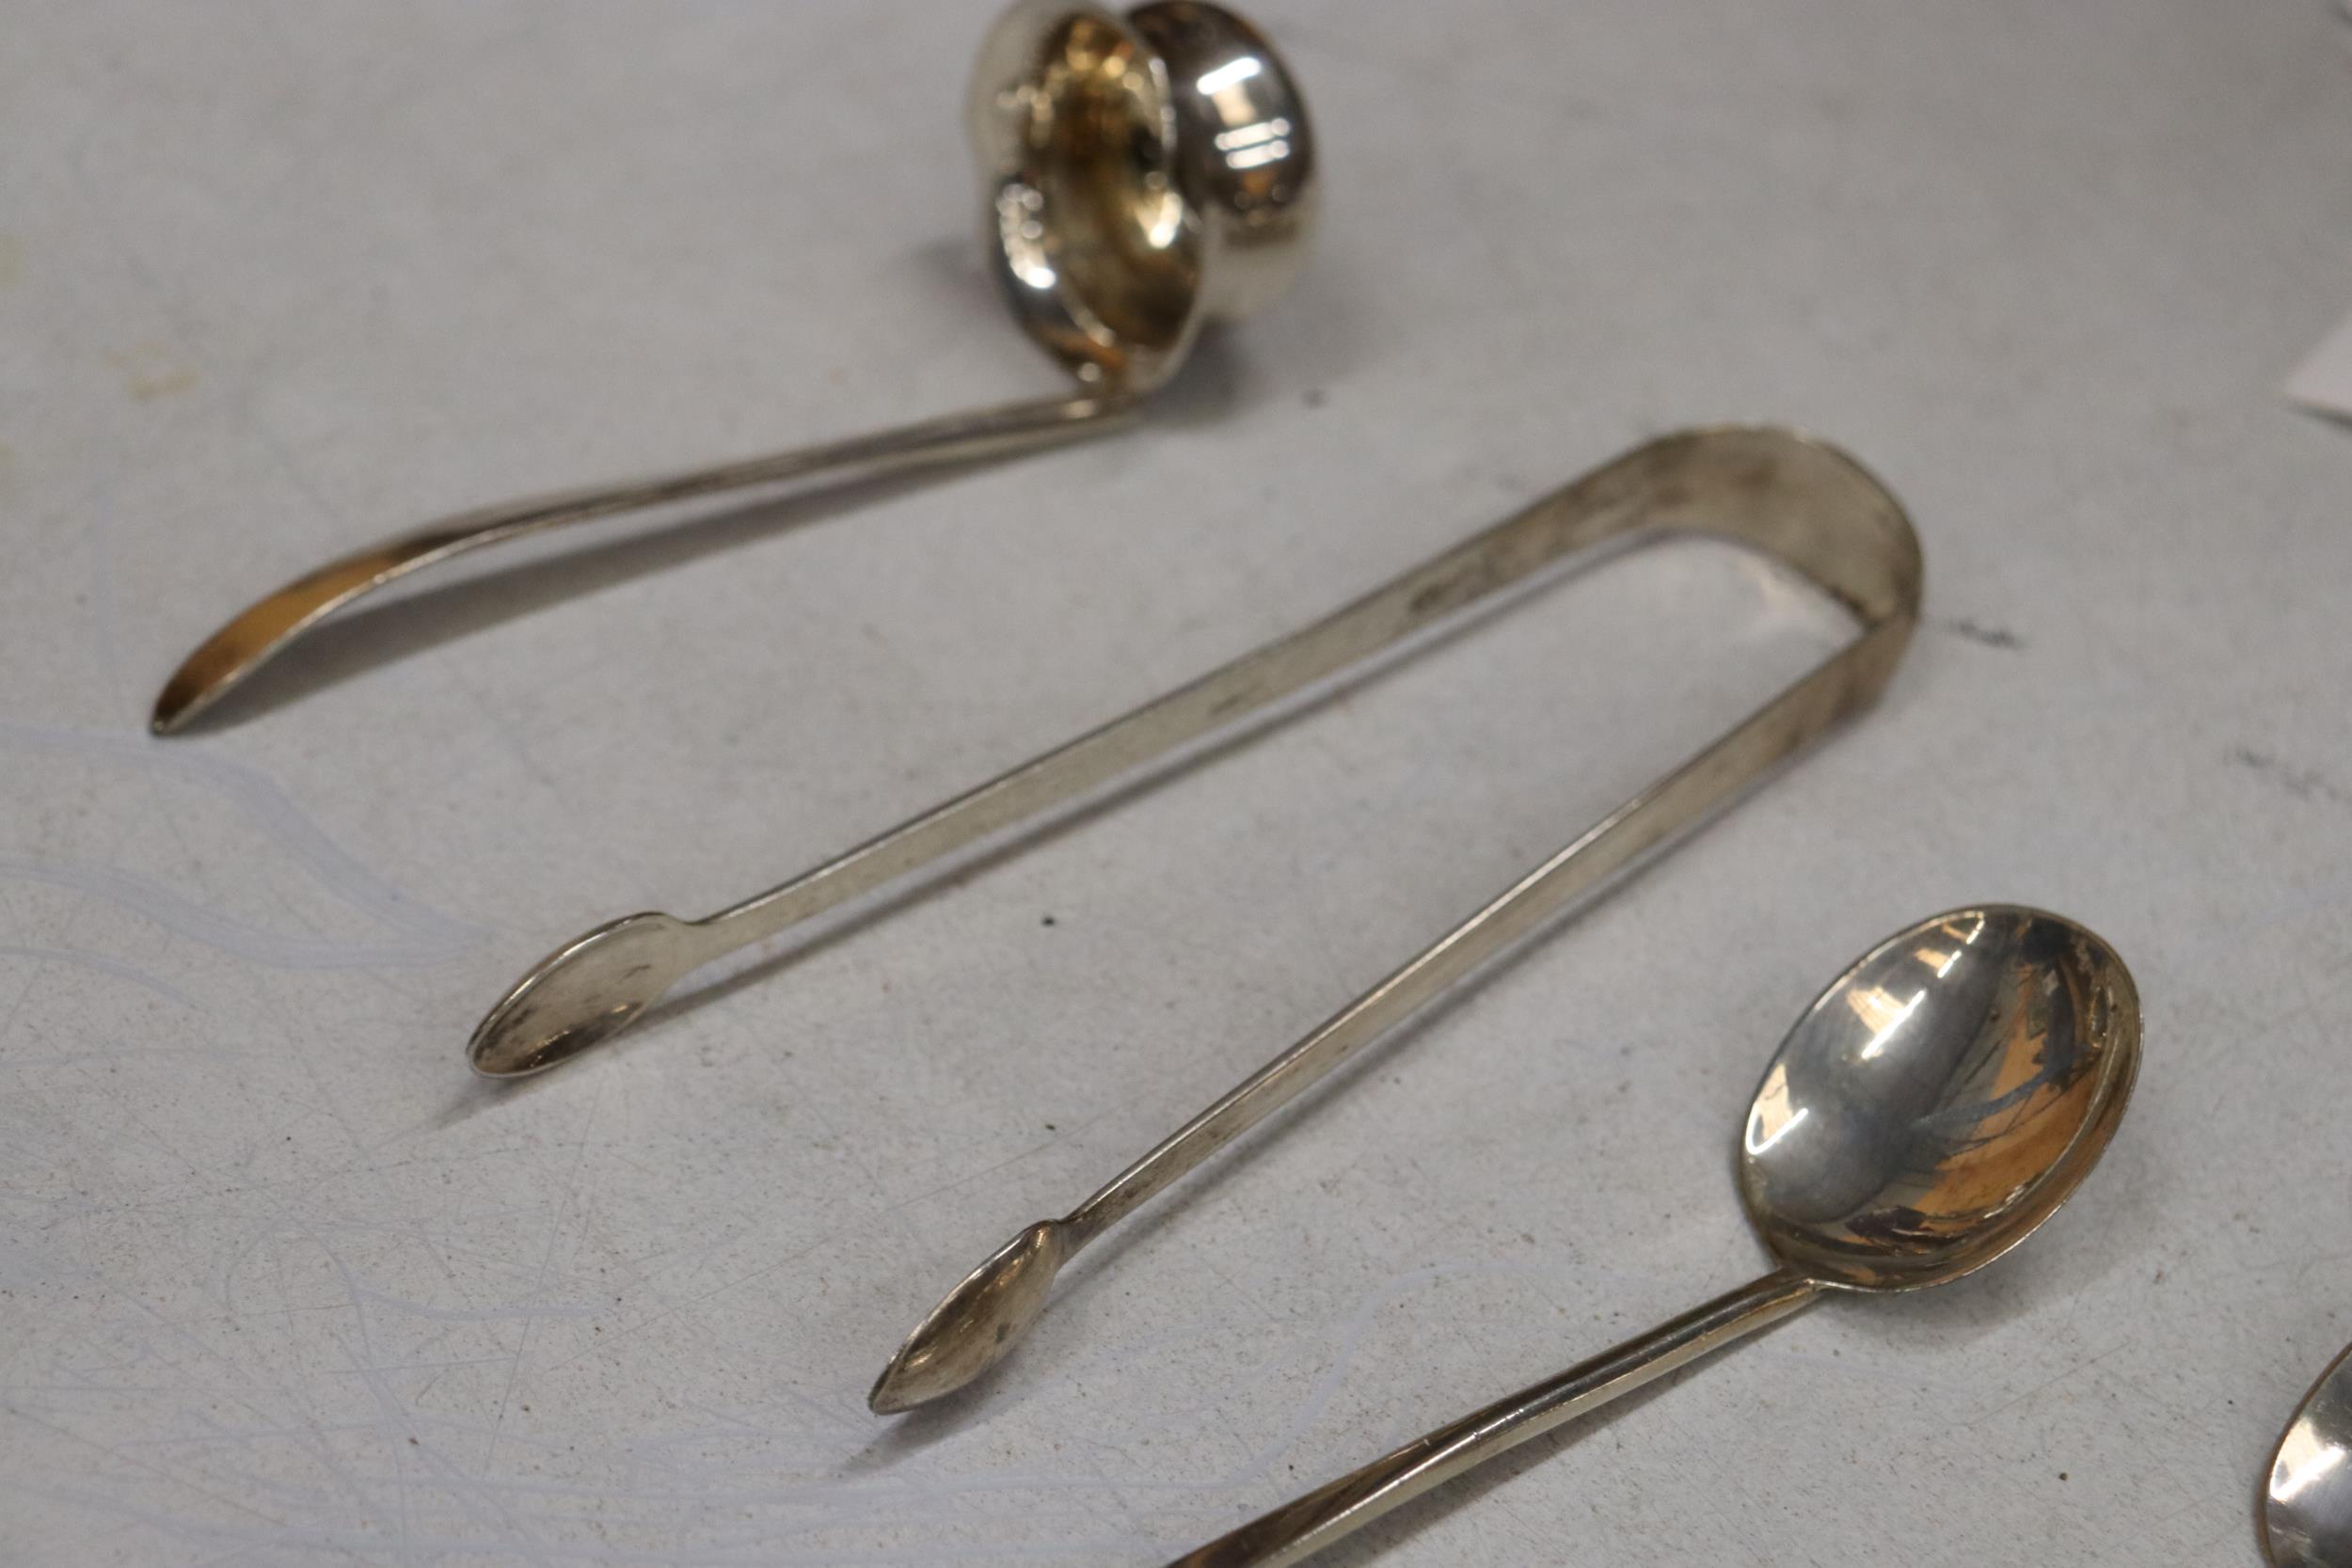 SIX HALLMARKED SILVER ITEMS TO INCLUDE LADELS, NIPS AND SPOONS GROSS WEIGHT 184 GRAMS - Image 9 of 9